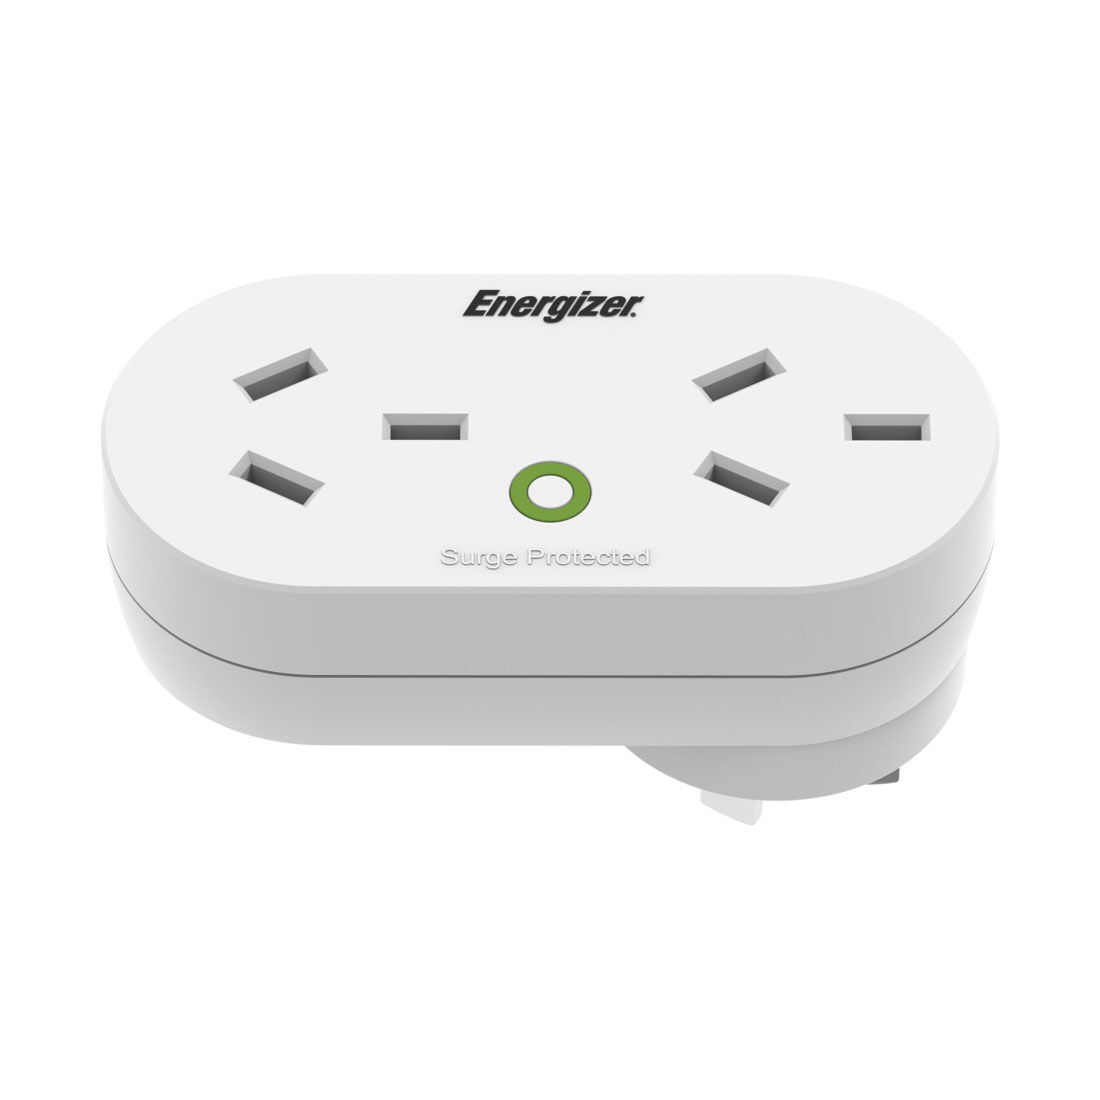 Energizer Double Adaptor Surge Protected, , scaau_hi-res